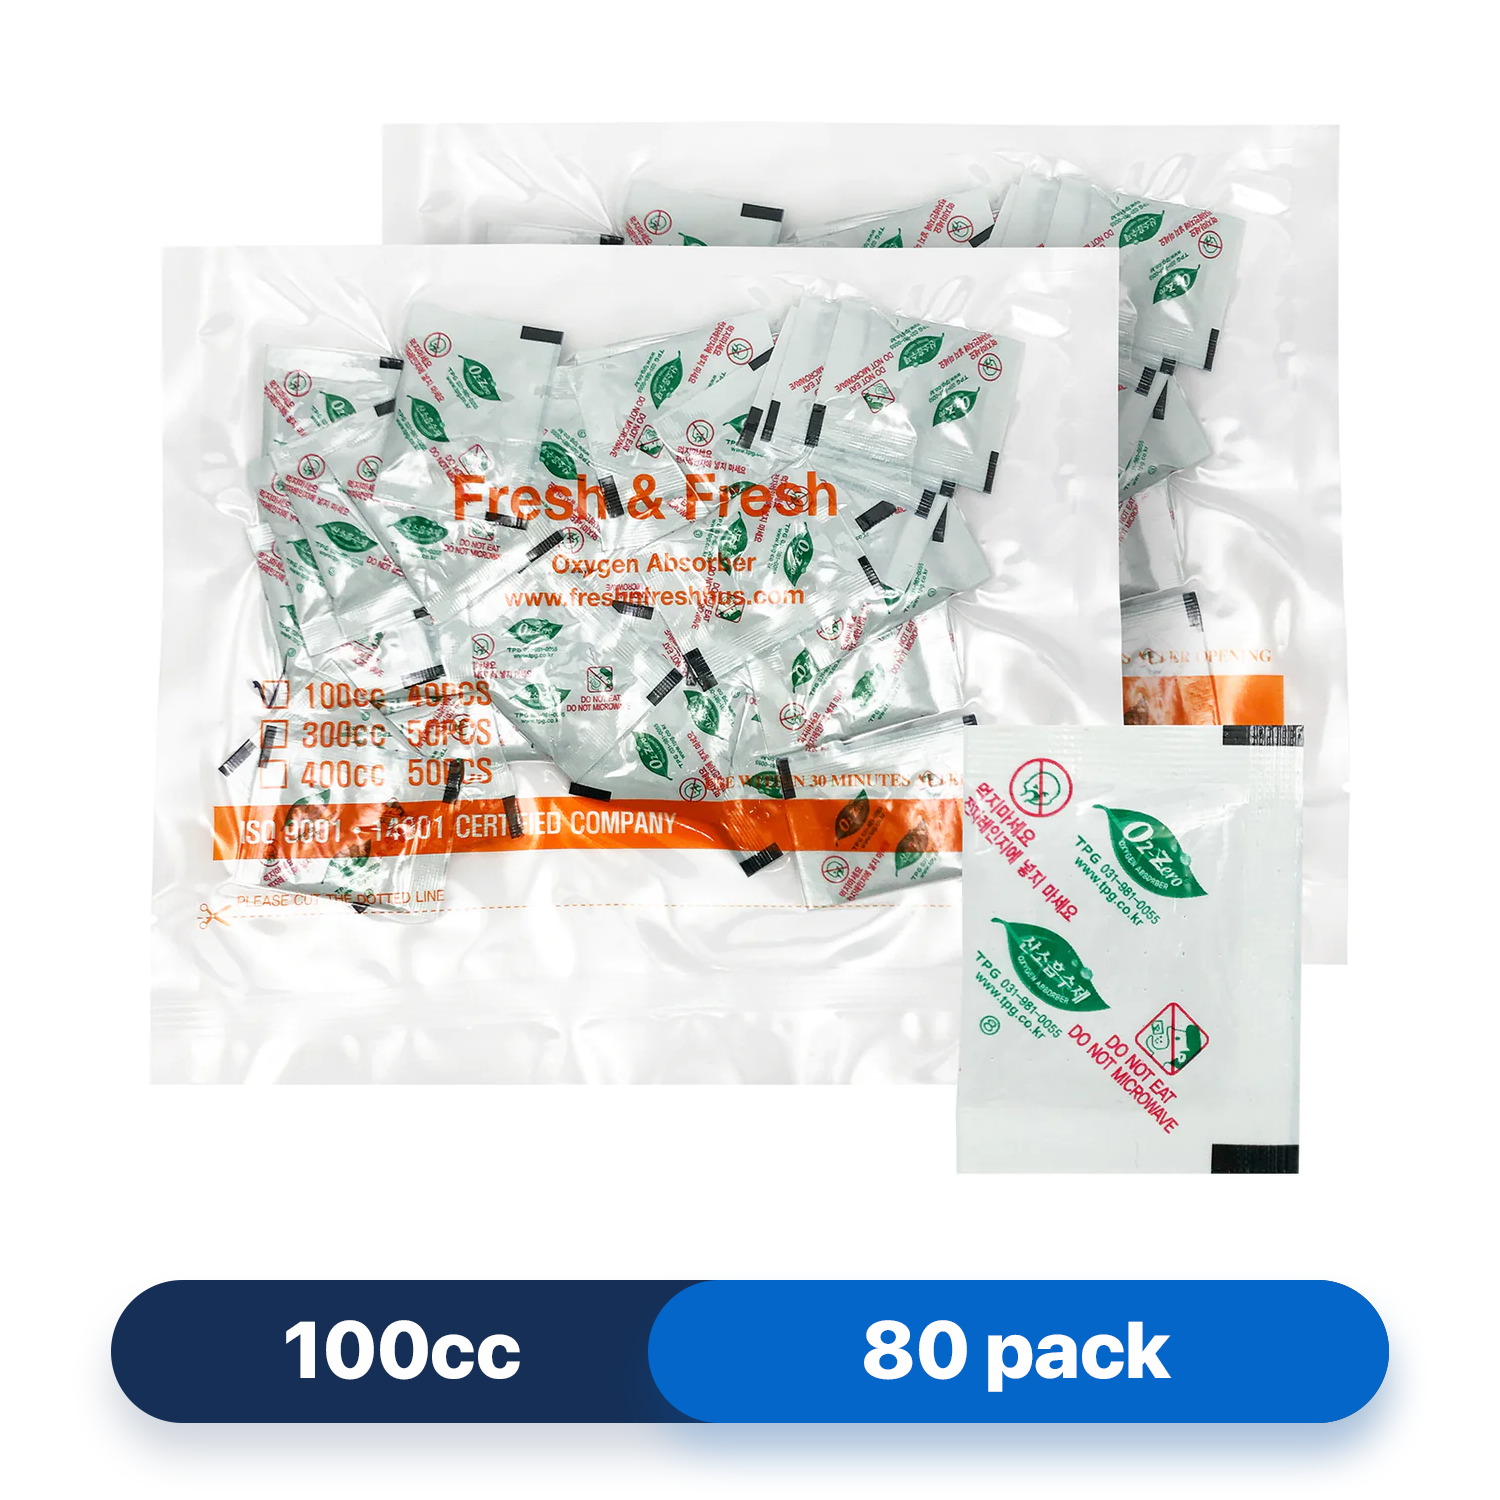 Fresh & Fresh 100 CC (80 Packets) Premium Oxygen Absorbers (2 Bag of 40 Packets) - ISO 9001 & 14001 Certified Facility Manufactured